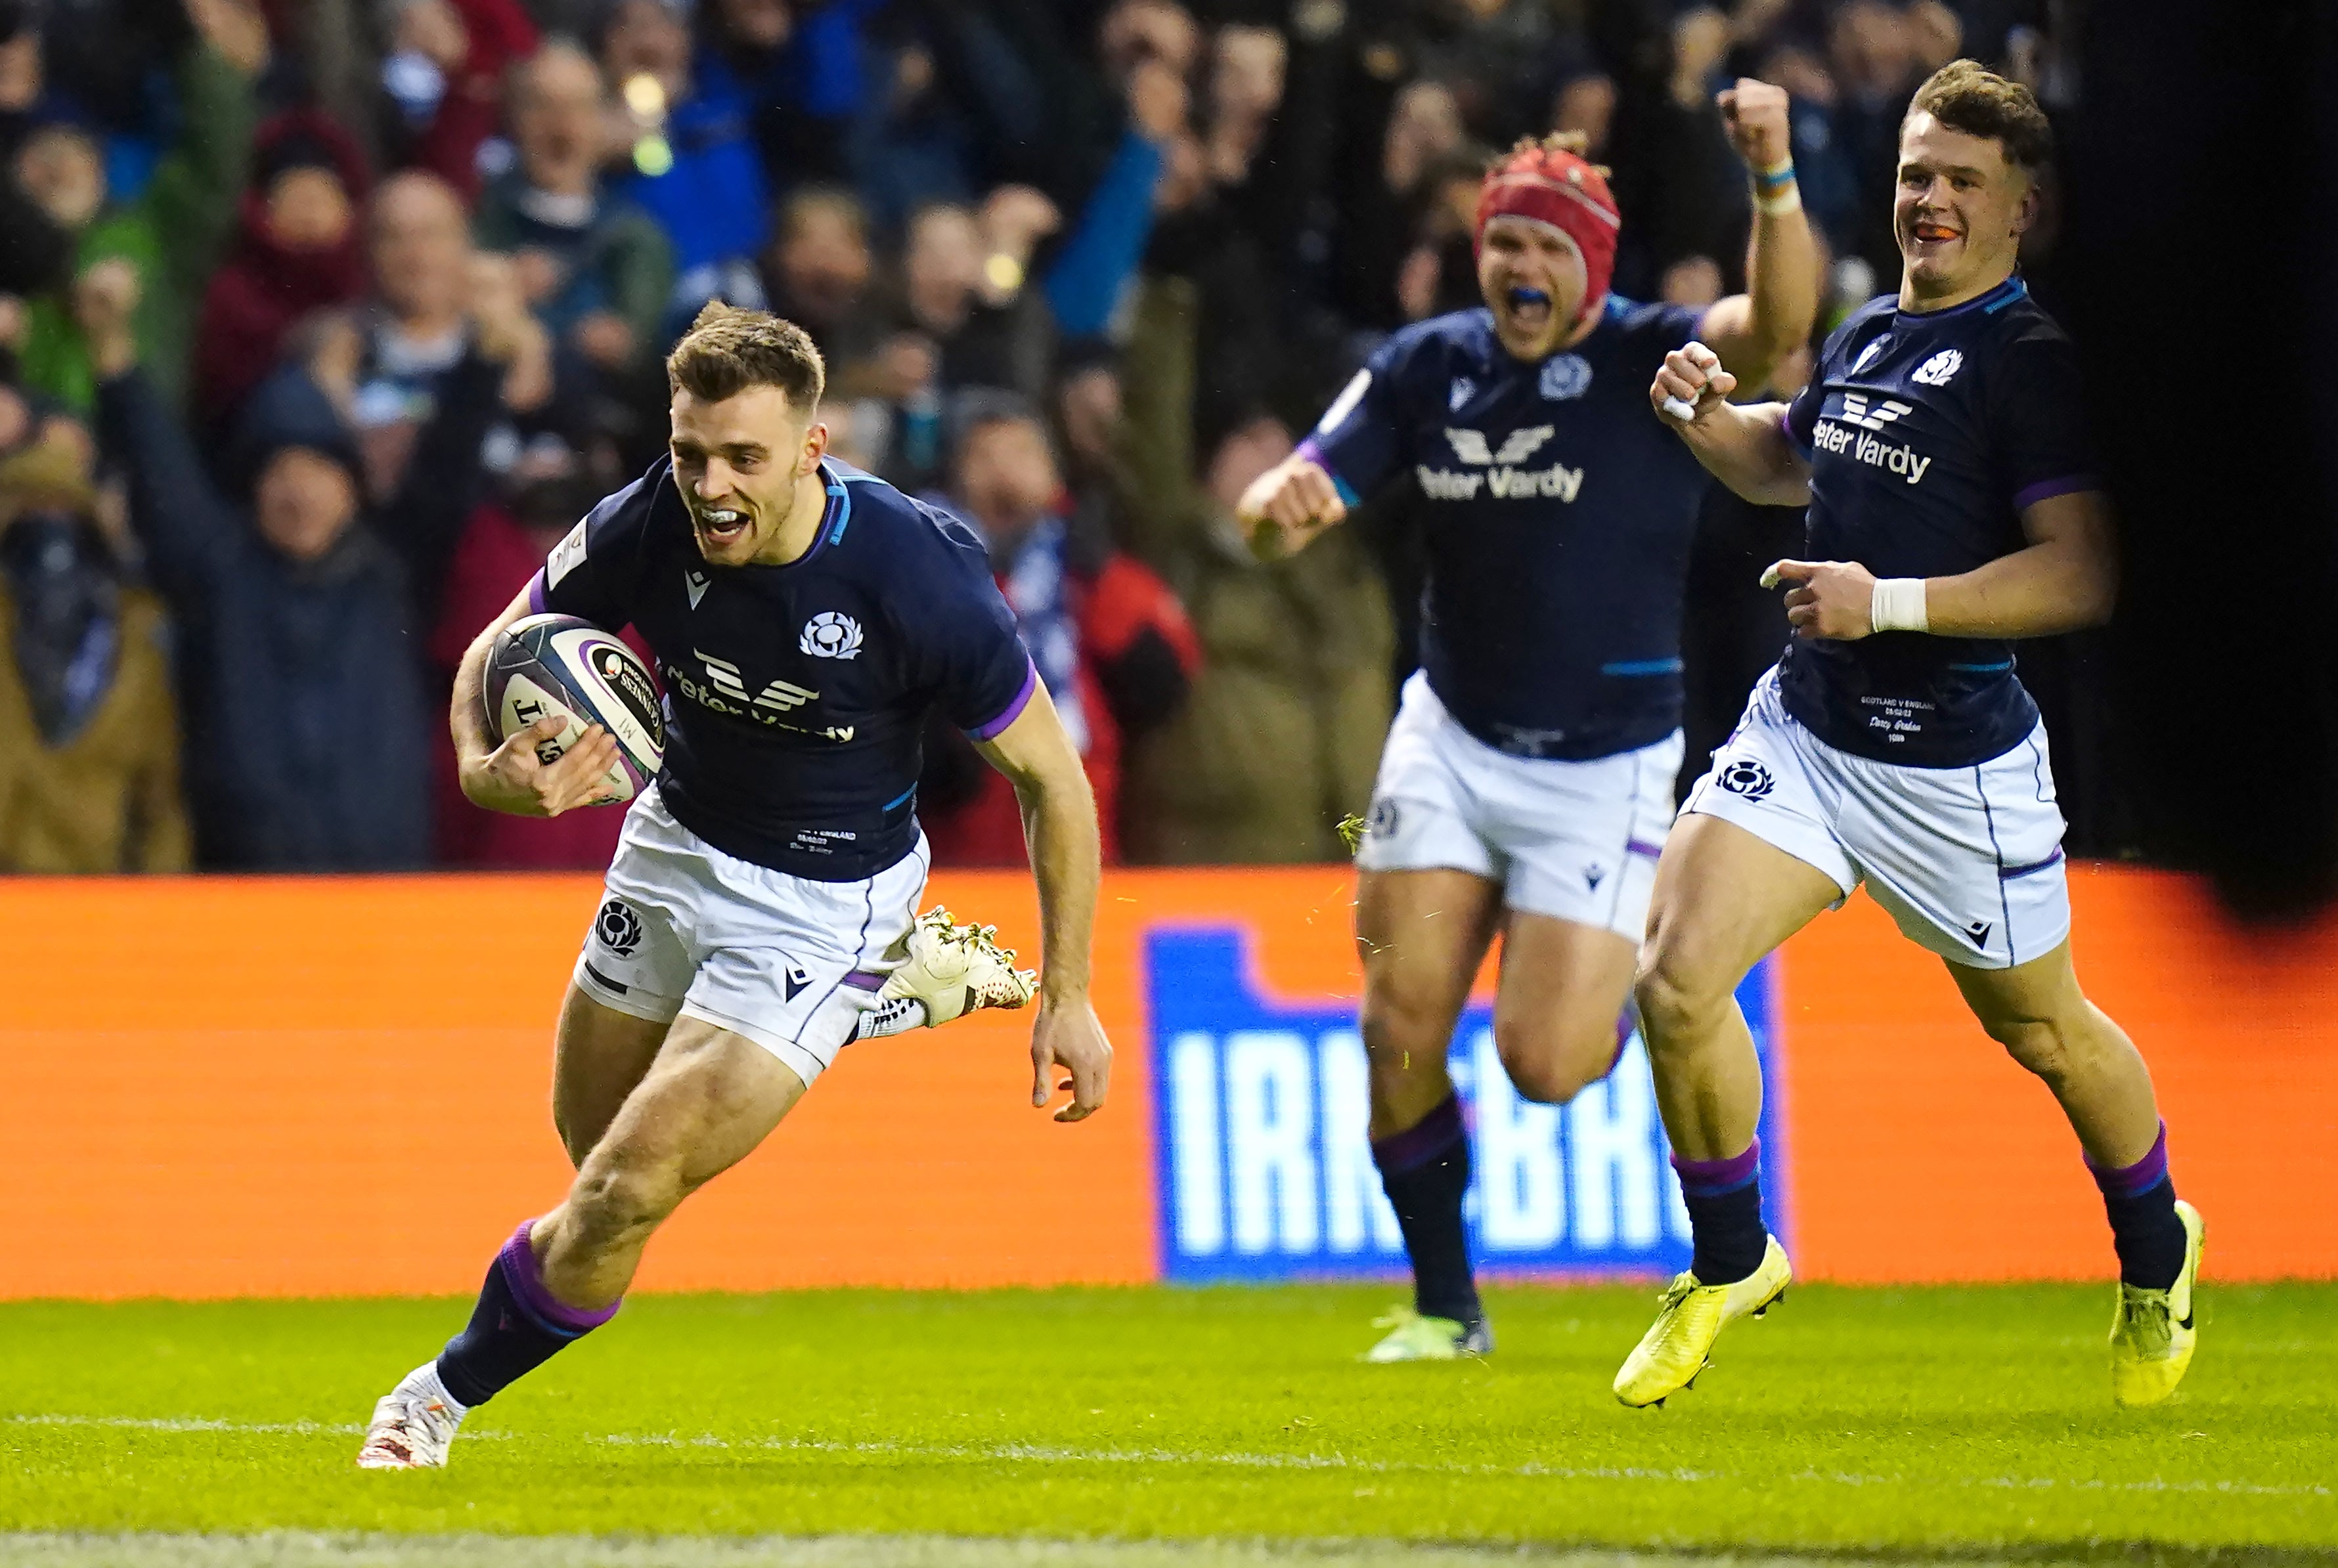 Ben White aims to create more good times for fans as Scotland seek a